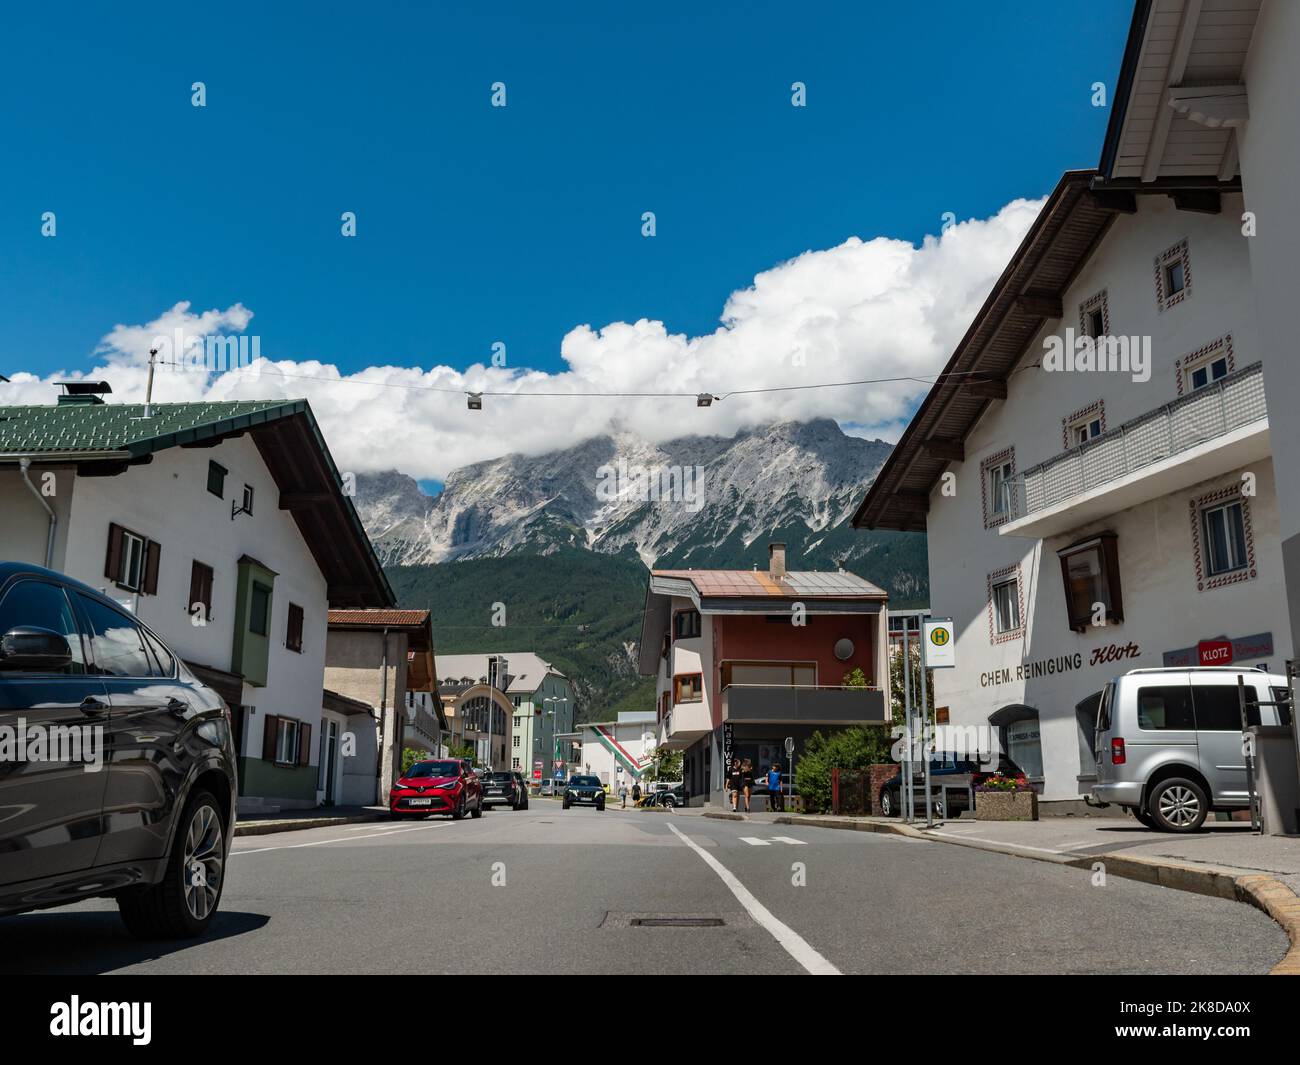 Street view in Tirol. People and cars are moving in the town. The road is going up steep and mountains of the Alps are in the background. White clouds Stock Photo